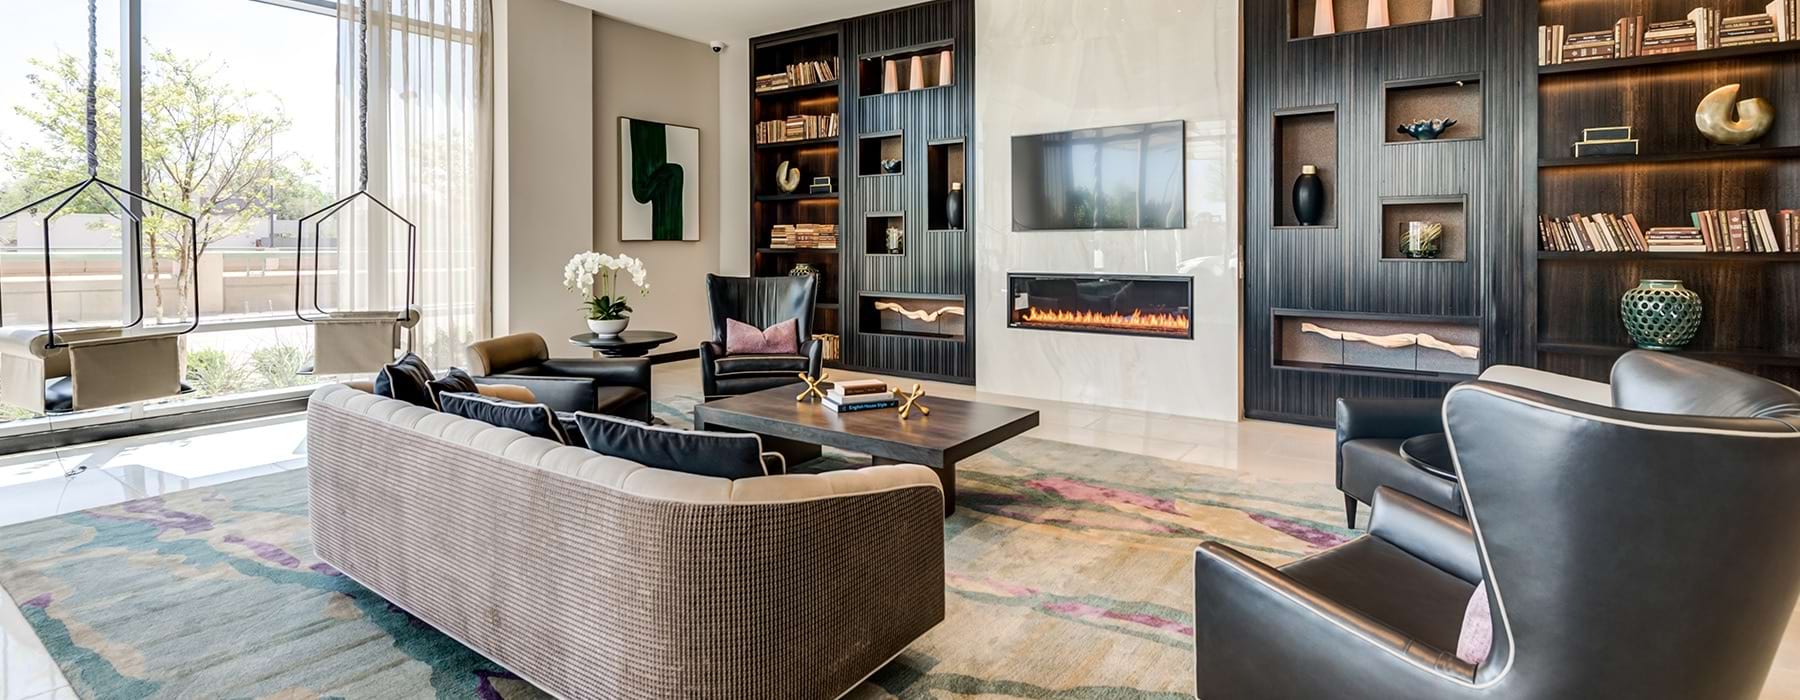 resident lounge and library area with a fireplace and warm accents with leather chairs for seating